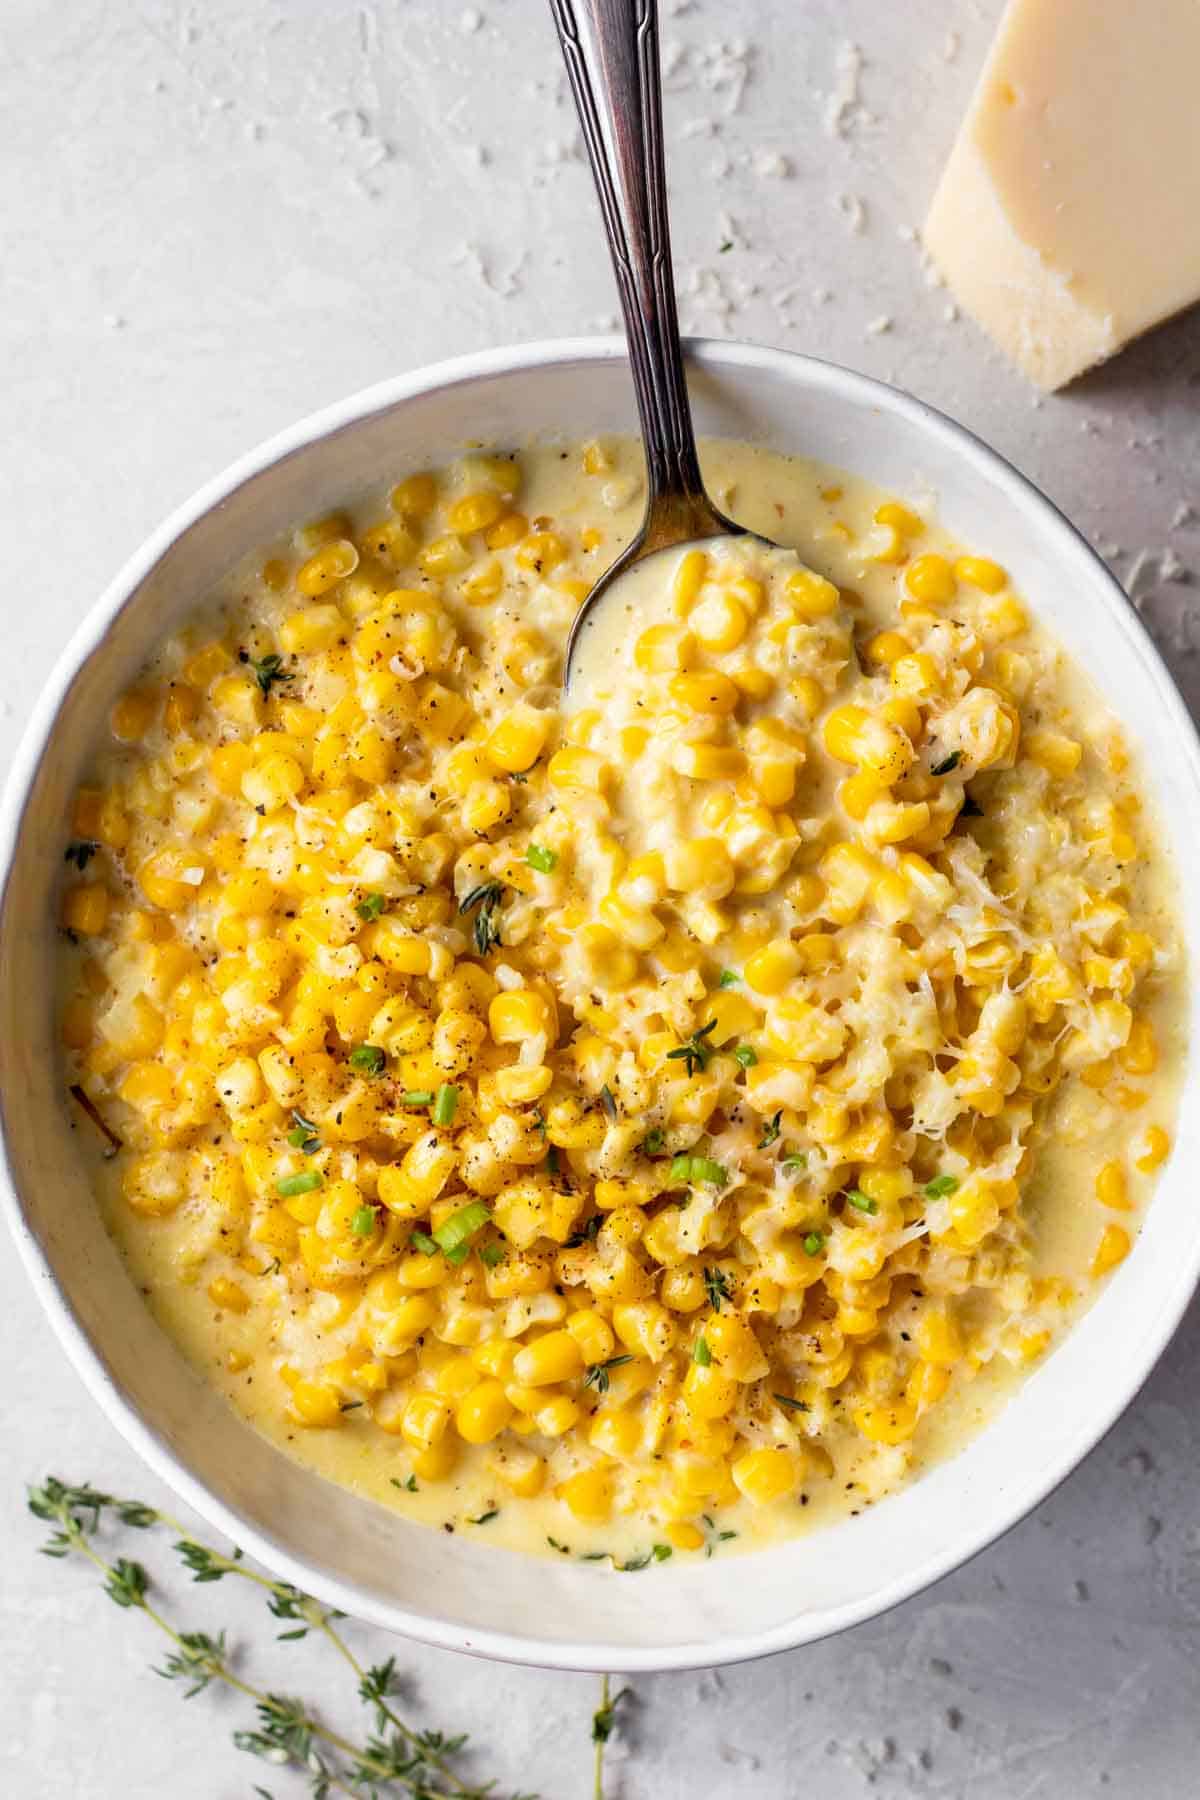 Bowl of creamed corn served with a spoon.